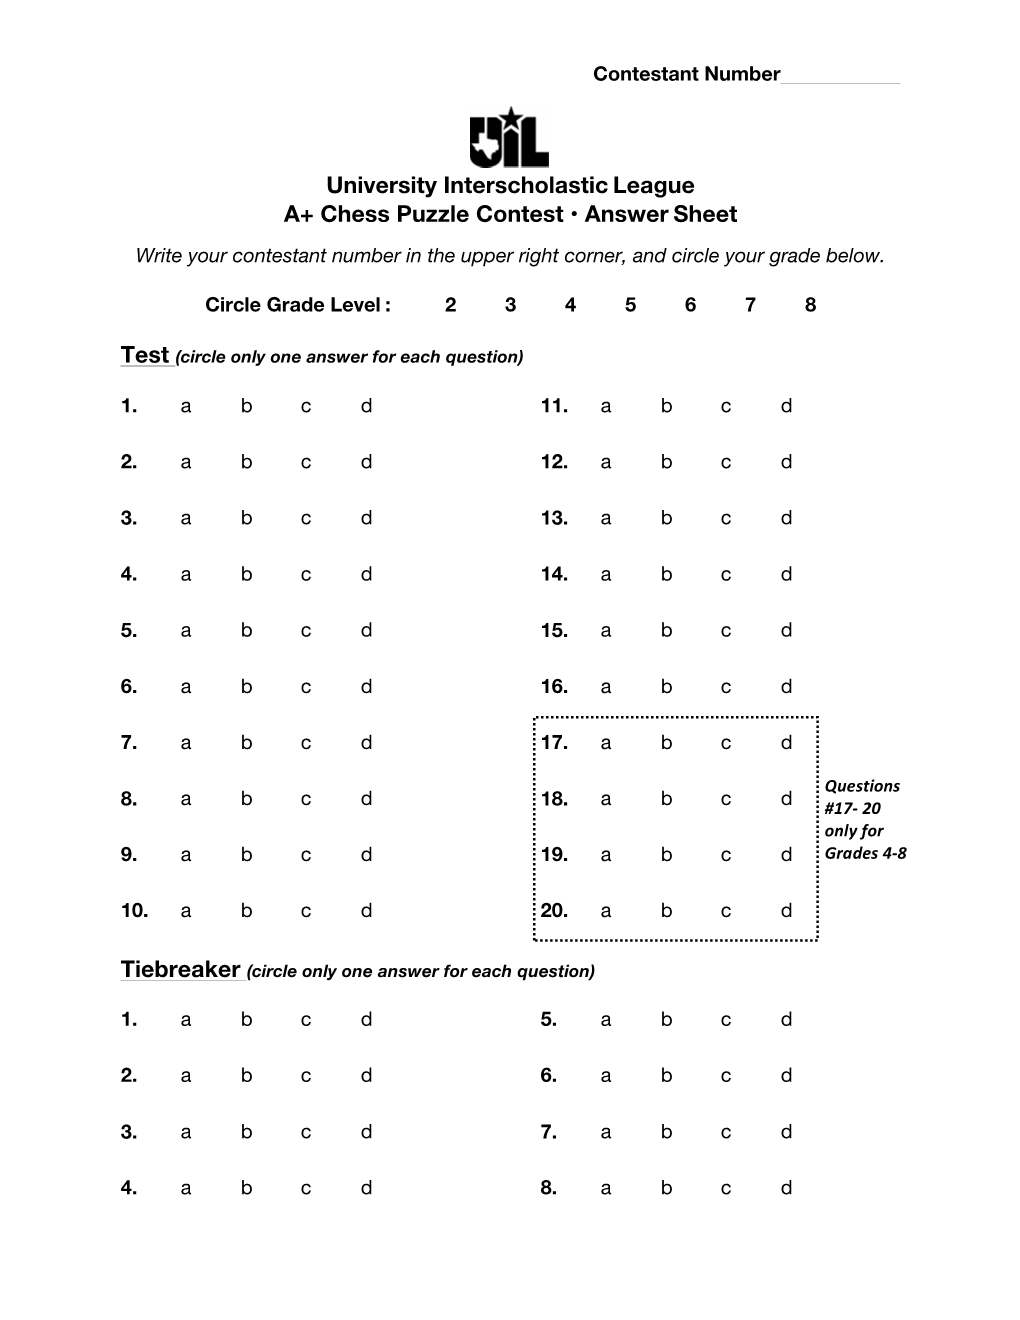 University Interscholastic League A+ Chess Puzzle Contest • Answer Sheet Write Your Contestant Number in the Upper Right Corner, and Circle Your Grade Below